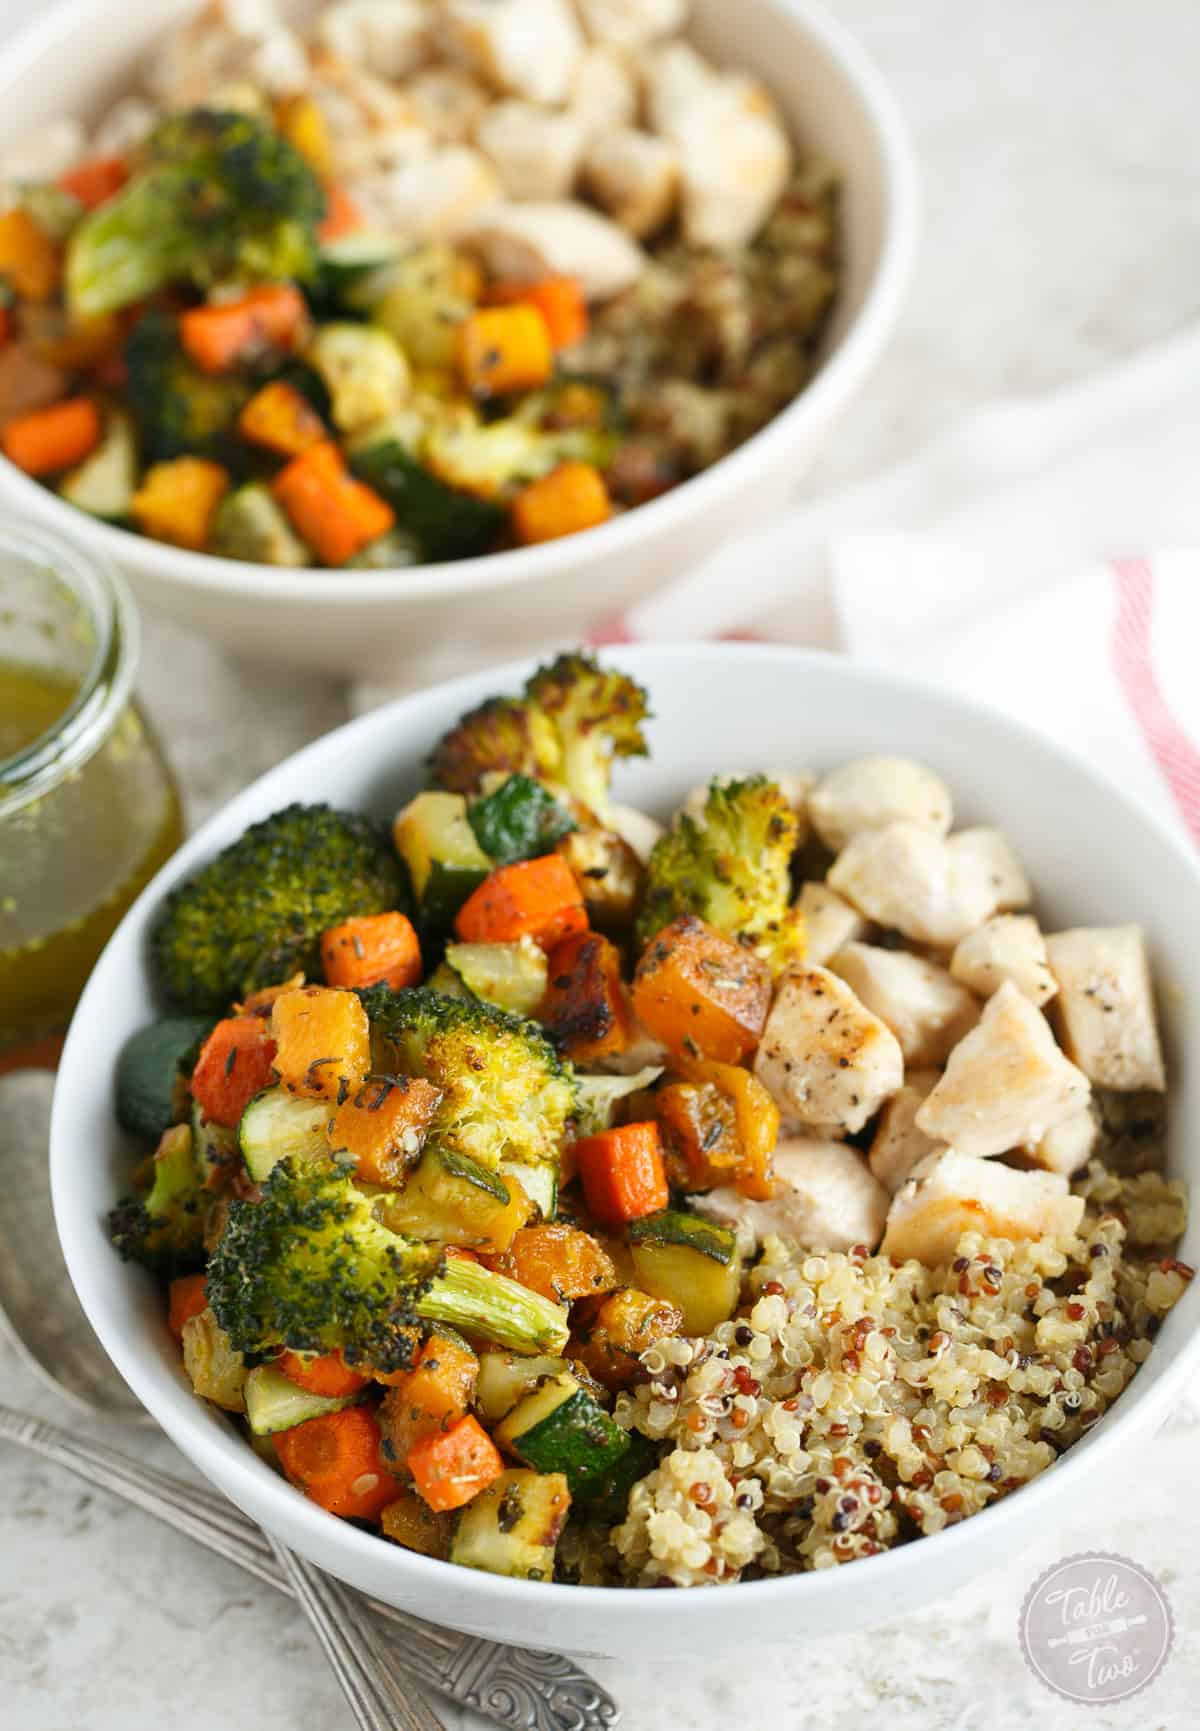 Two quinoa bowls topped with roasted vegetables and chicken.